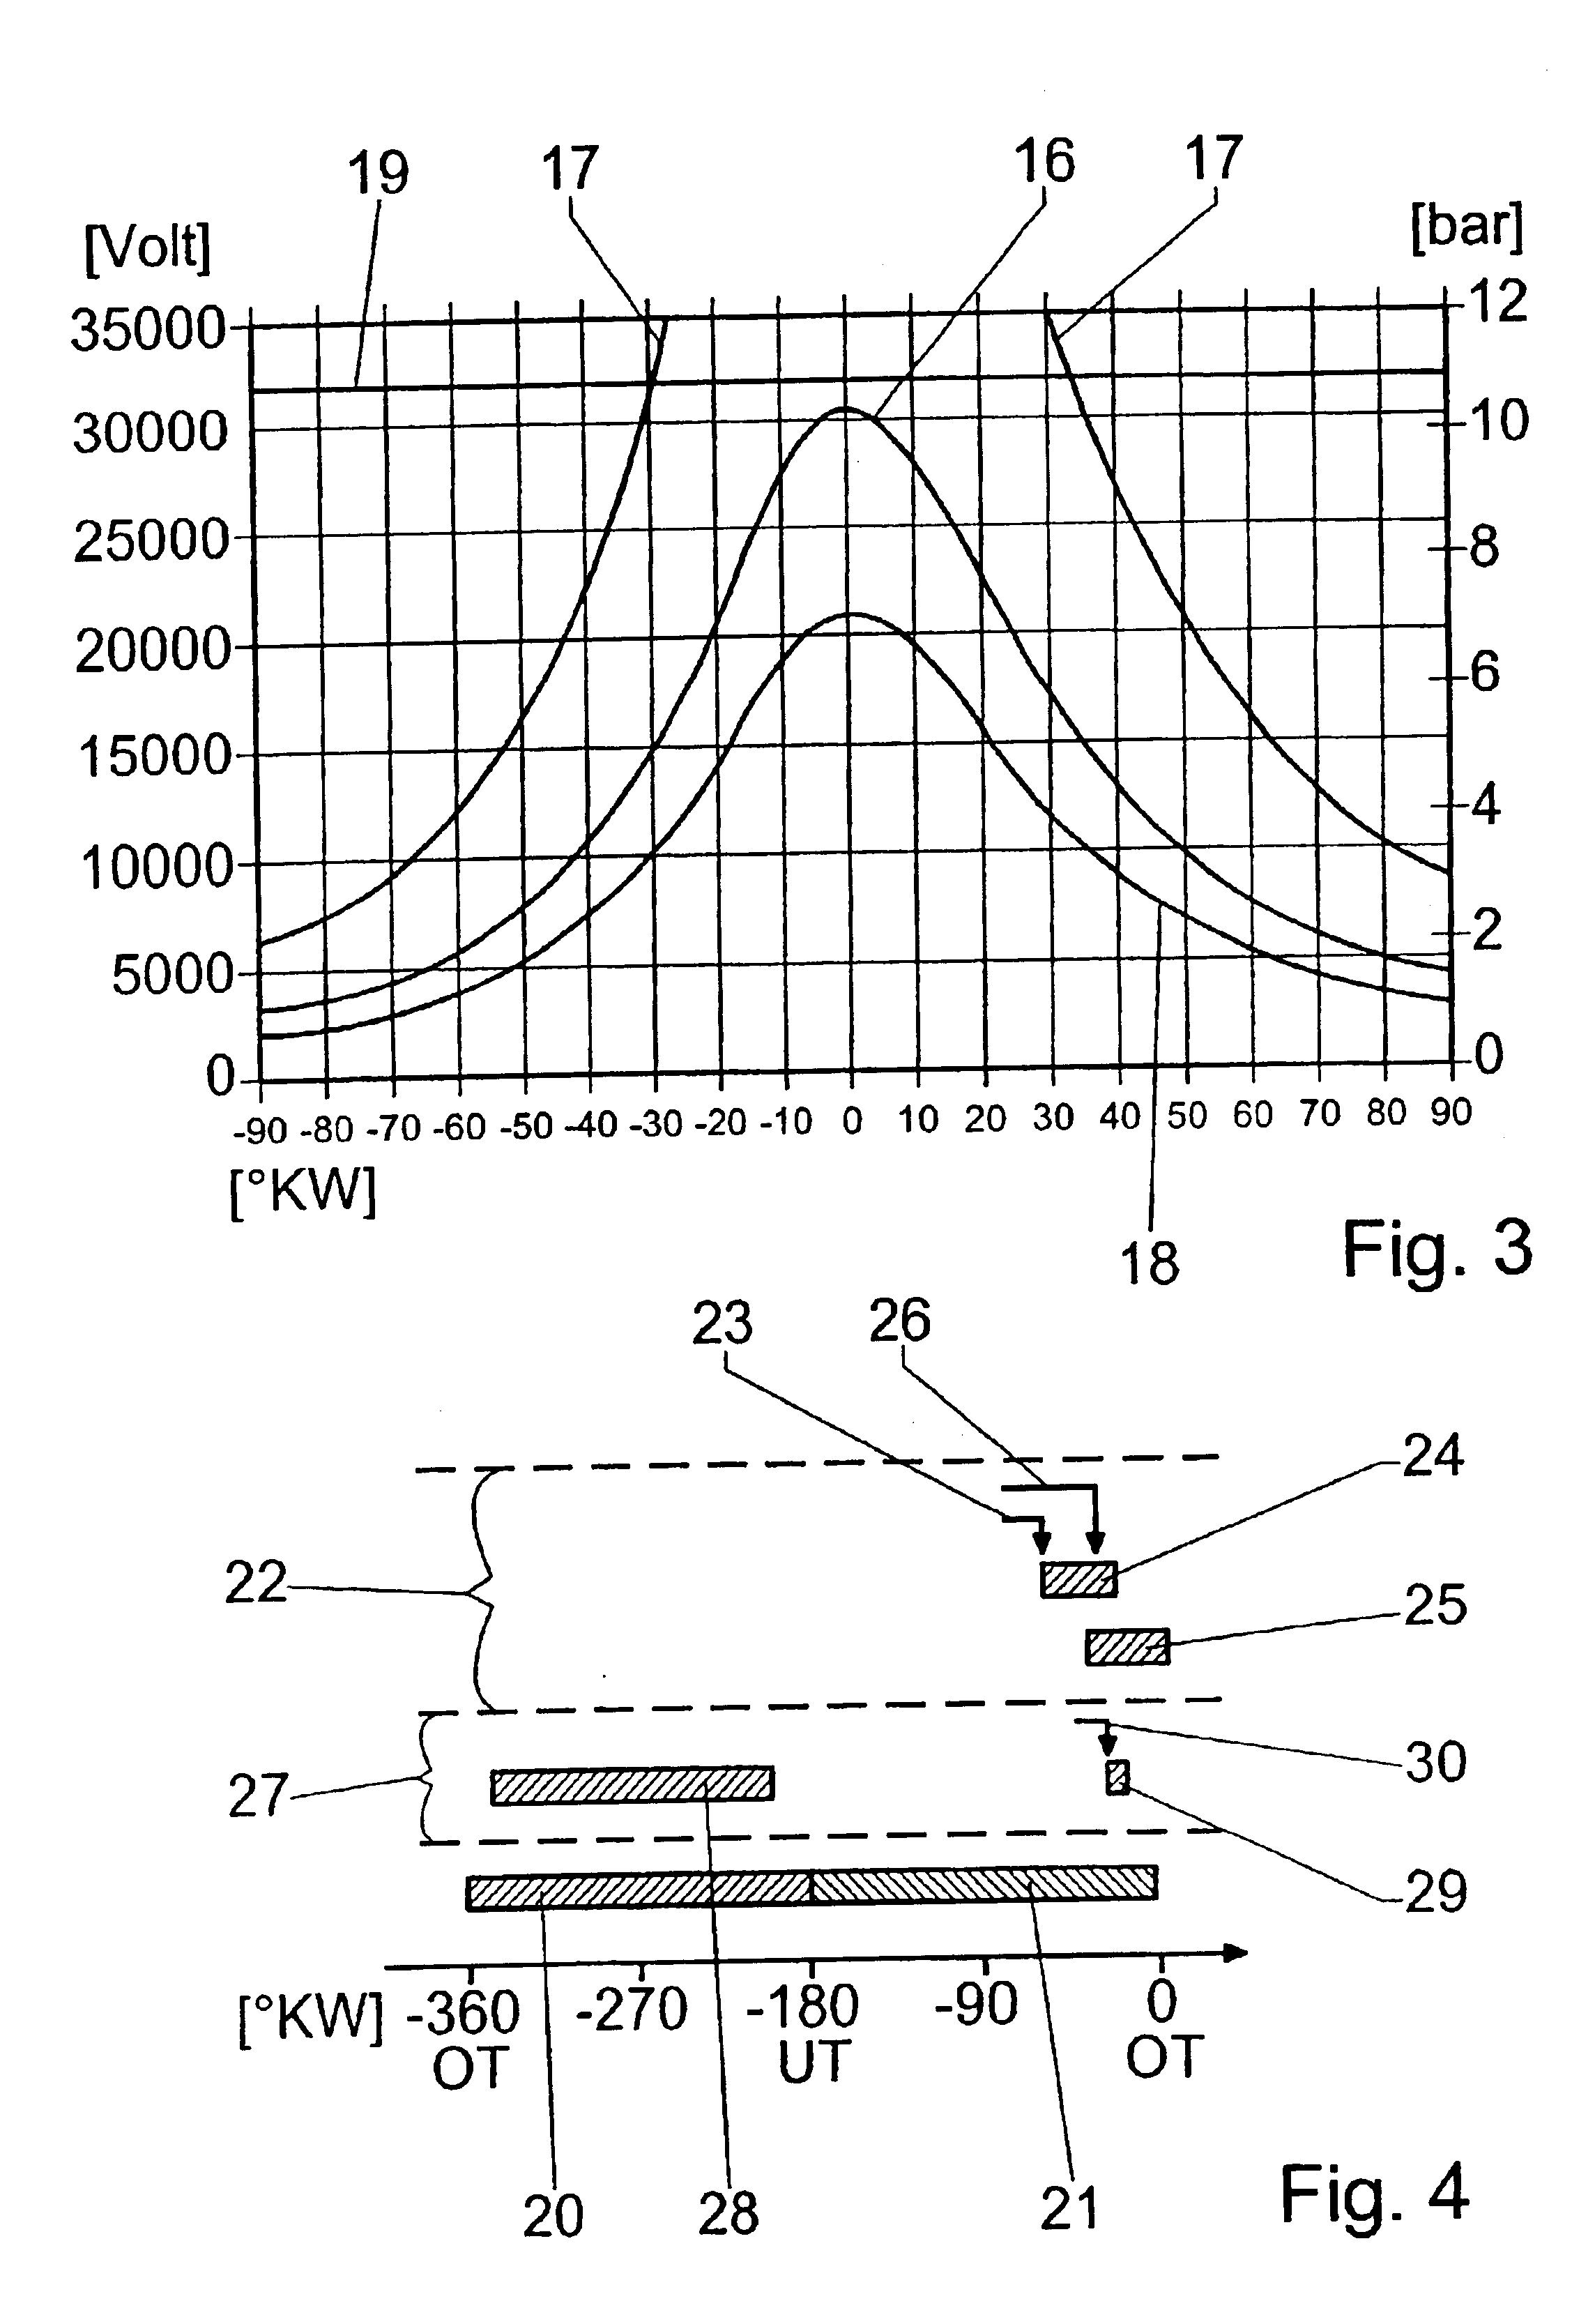 Internal combustion engine with direct injection